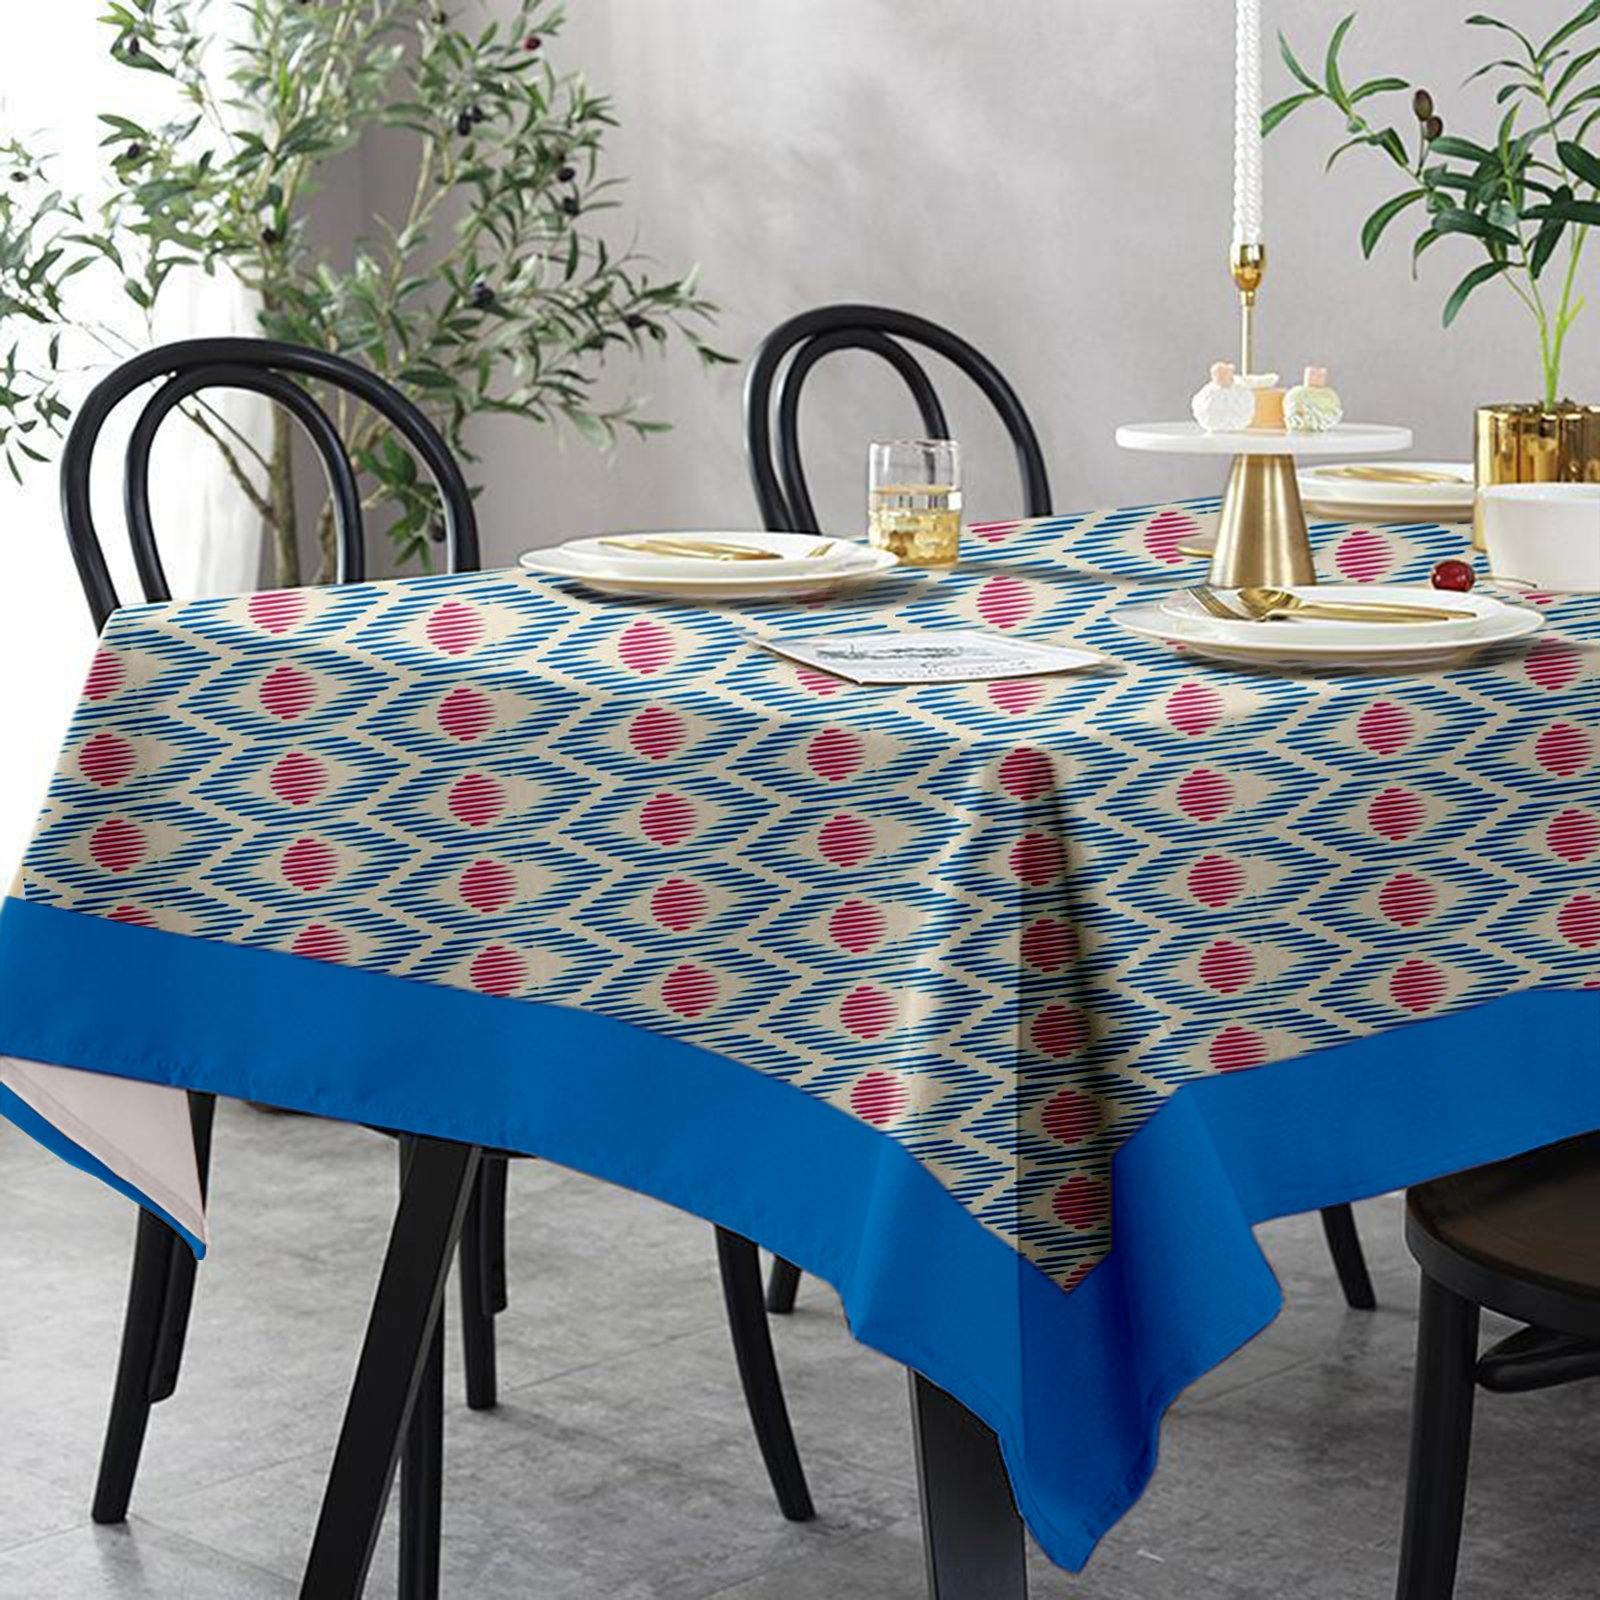 Lushomes 8 Seater Diamond Printed Dining Table Cover Cloth Linen (Pack of 1, 108 x 60 inches) - Lushomes